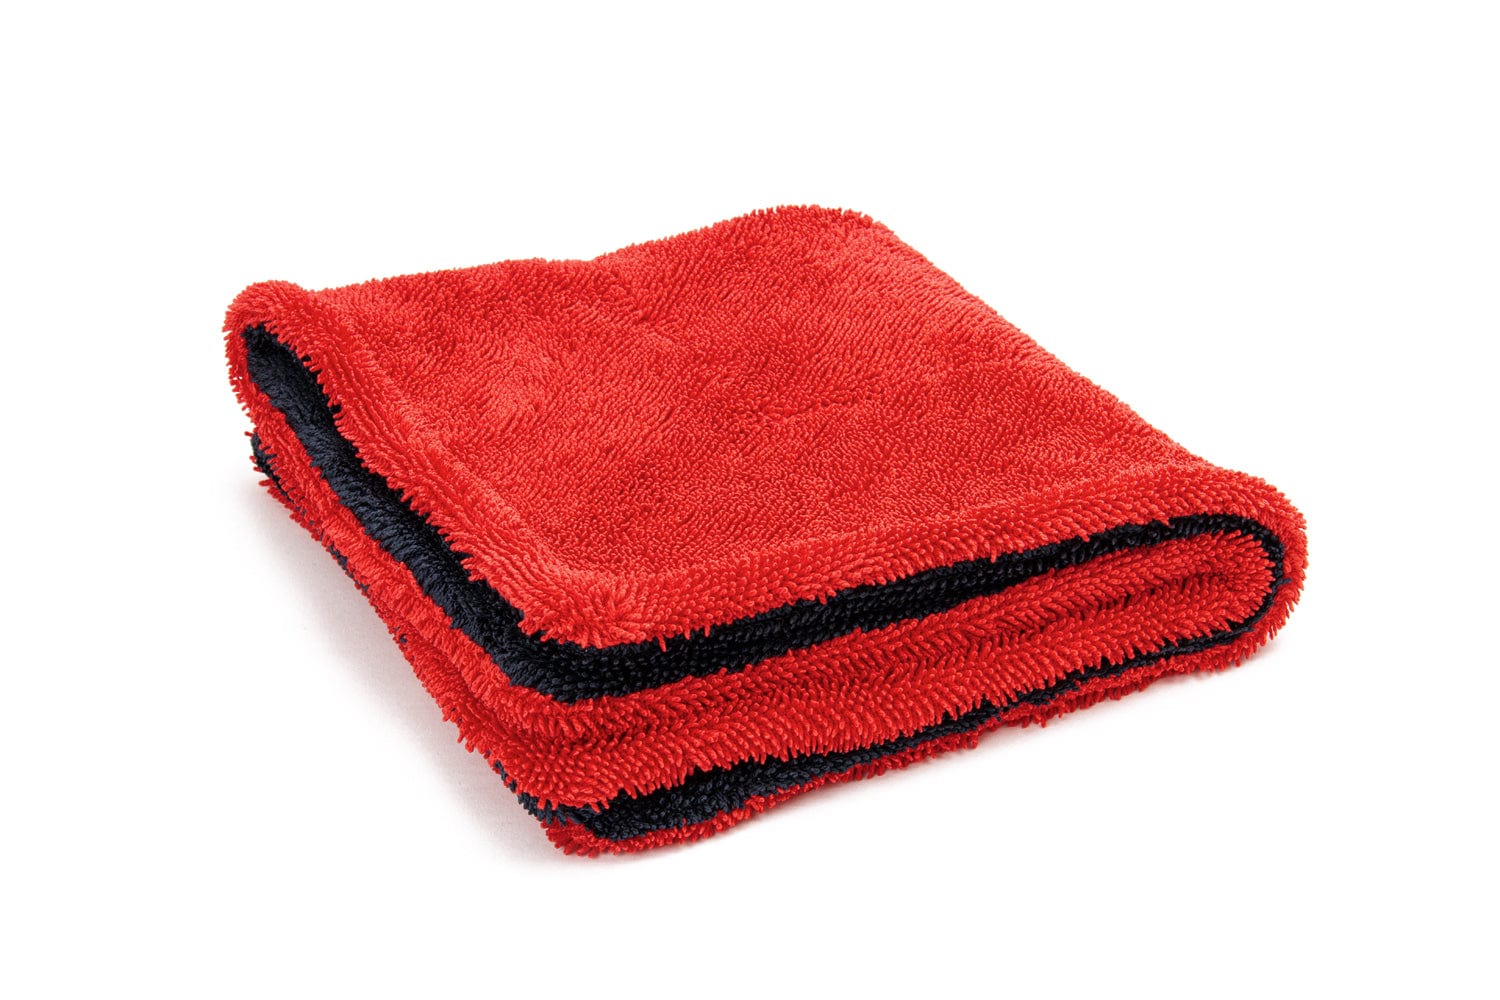 Autofiber Towel Red/Black FULL CASE Dreadnought MAX Jr. - Triple Layer Microfiber Twist Pile Drying Towel (16 in. x 16 in., 1400gsm) - 60 Case